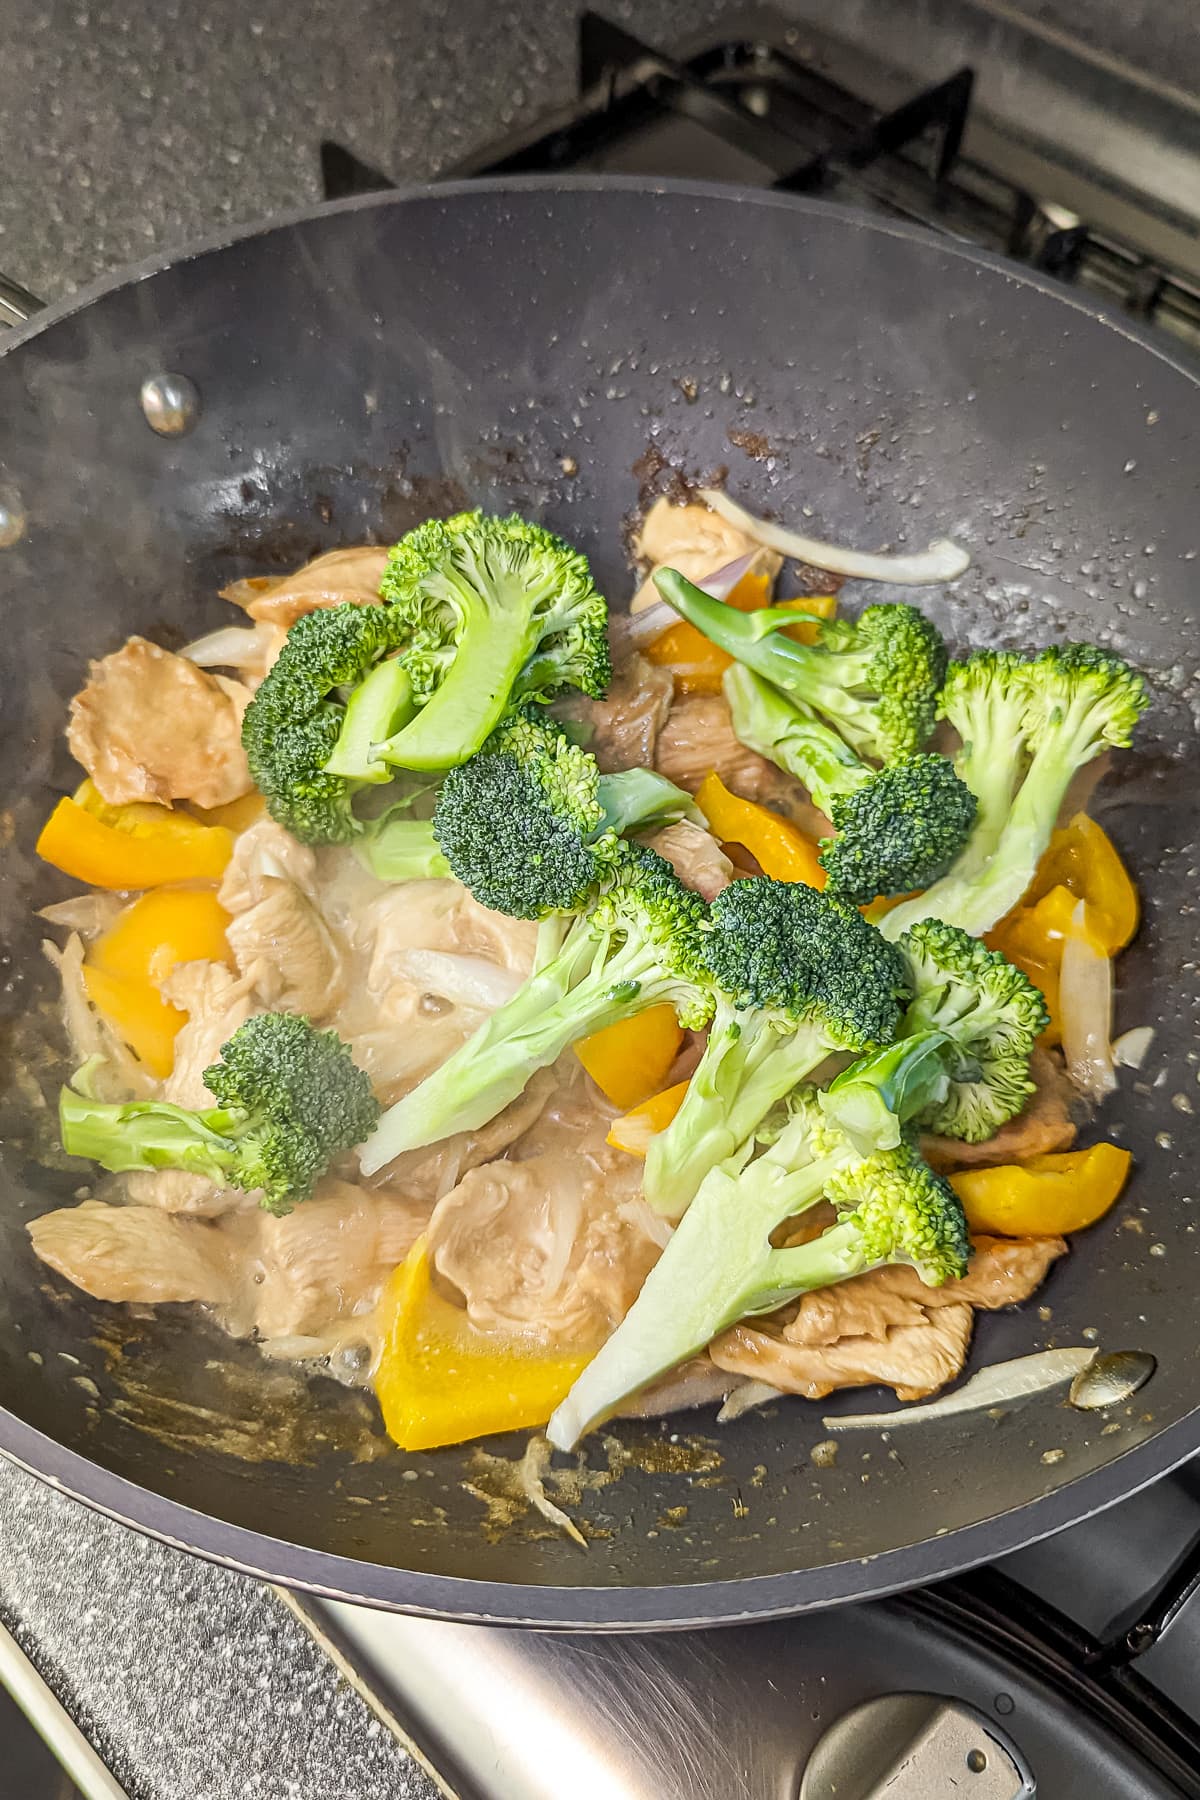 Broccoli florets added to the chicken and bell pepper mix in the pan.